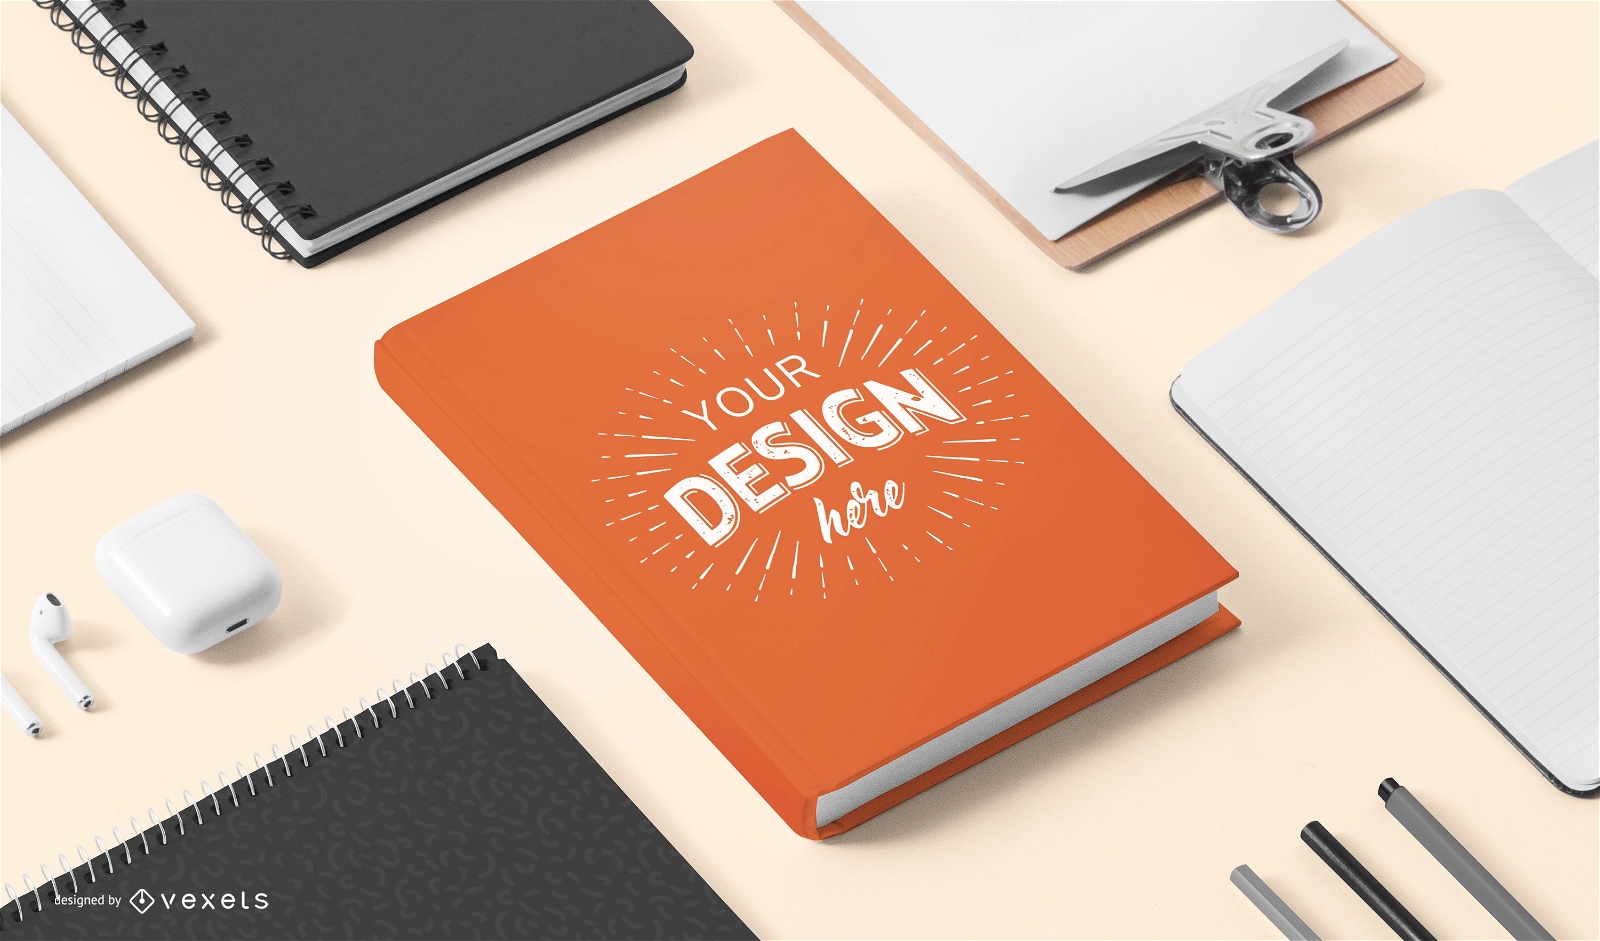 Book cover stationery mockup